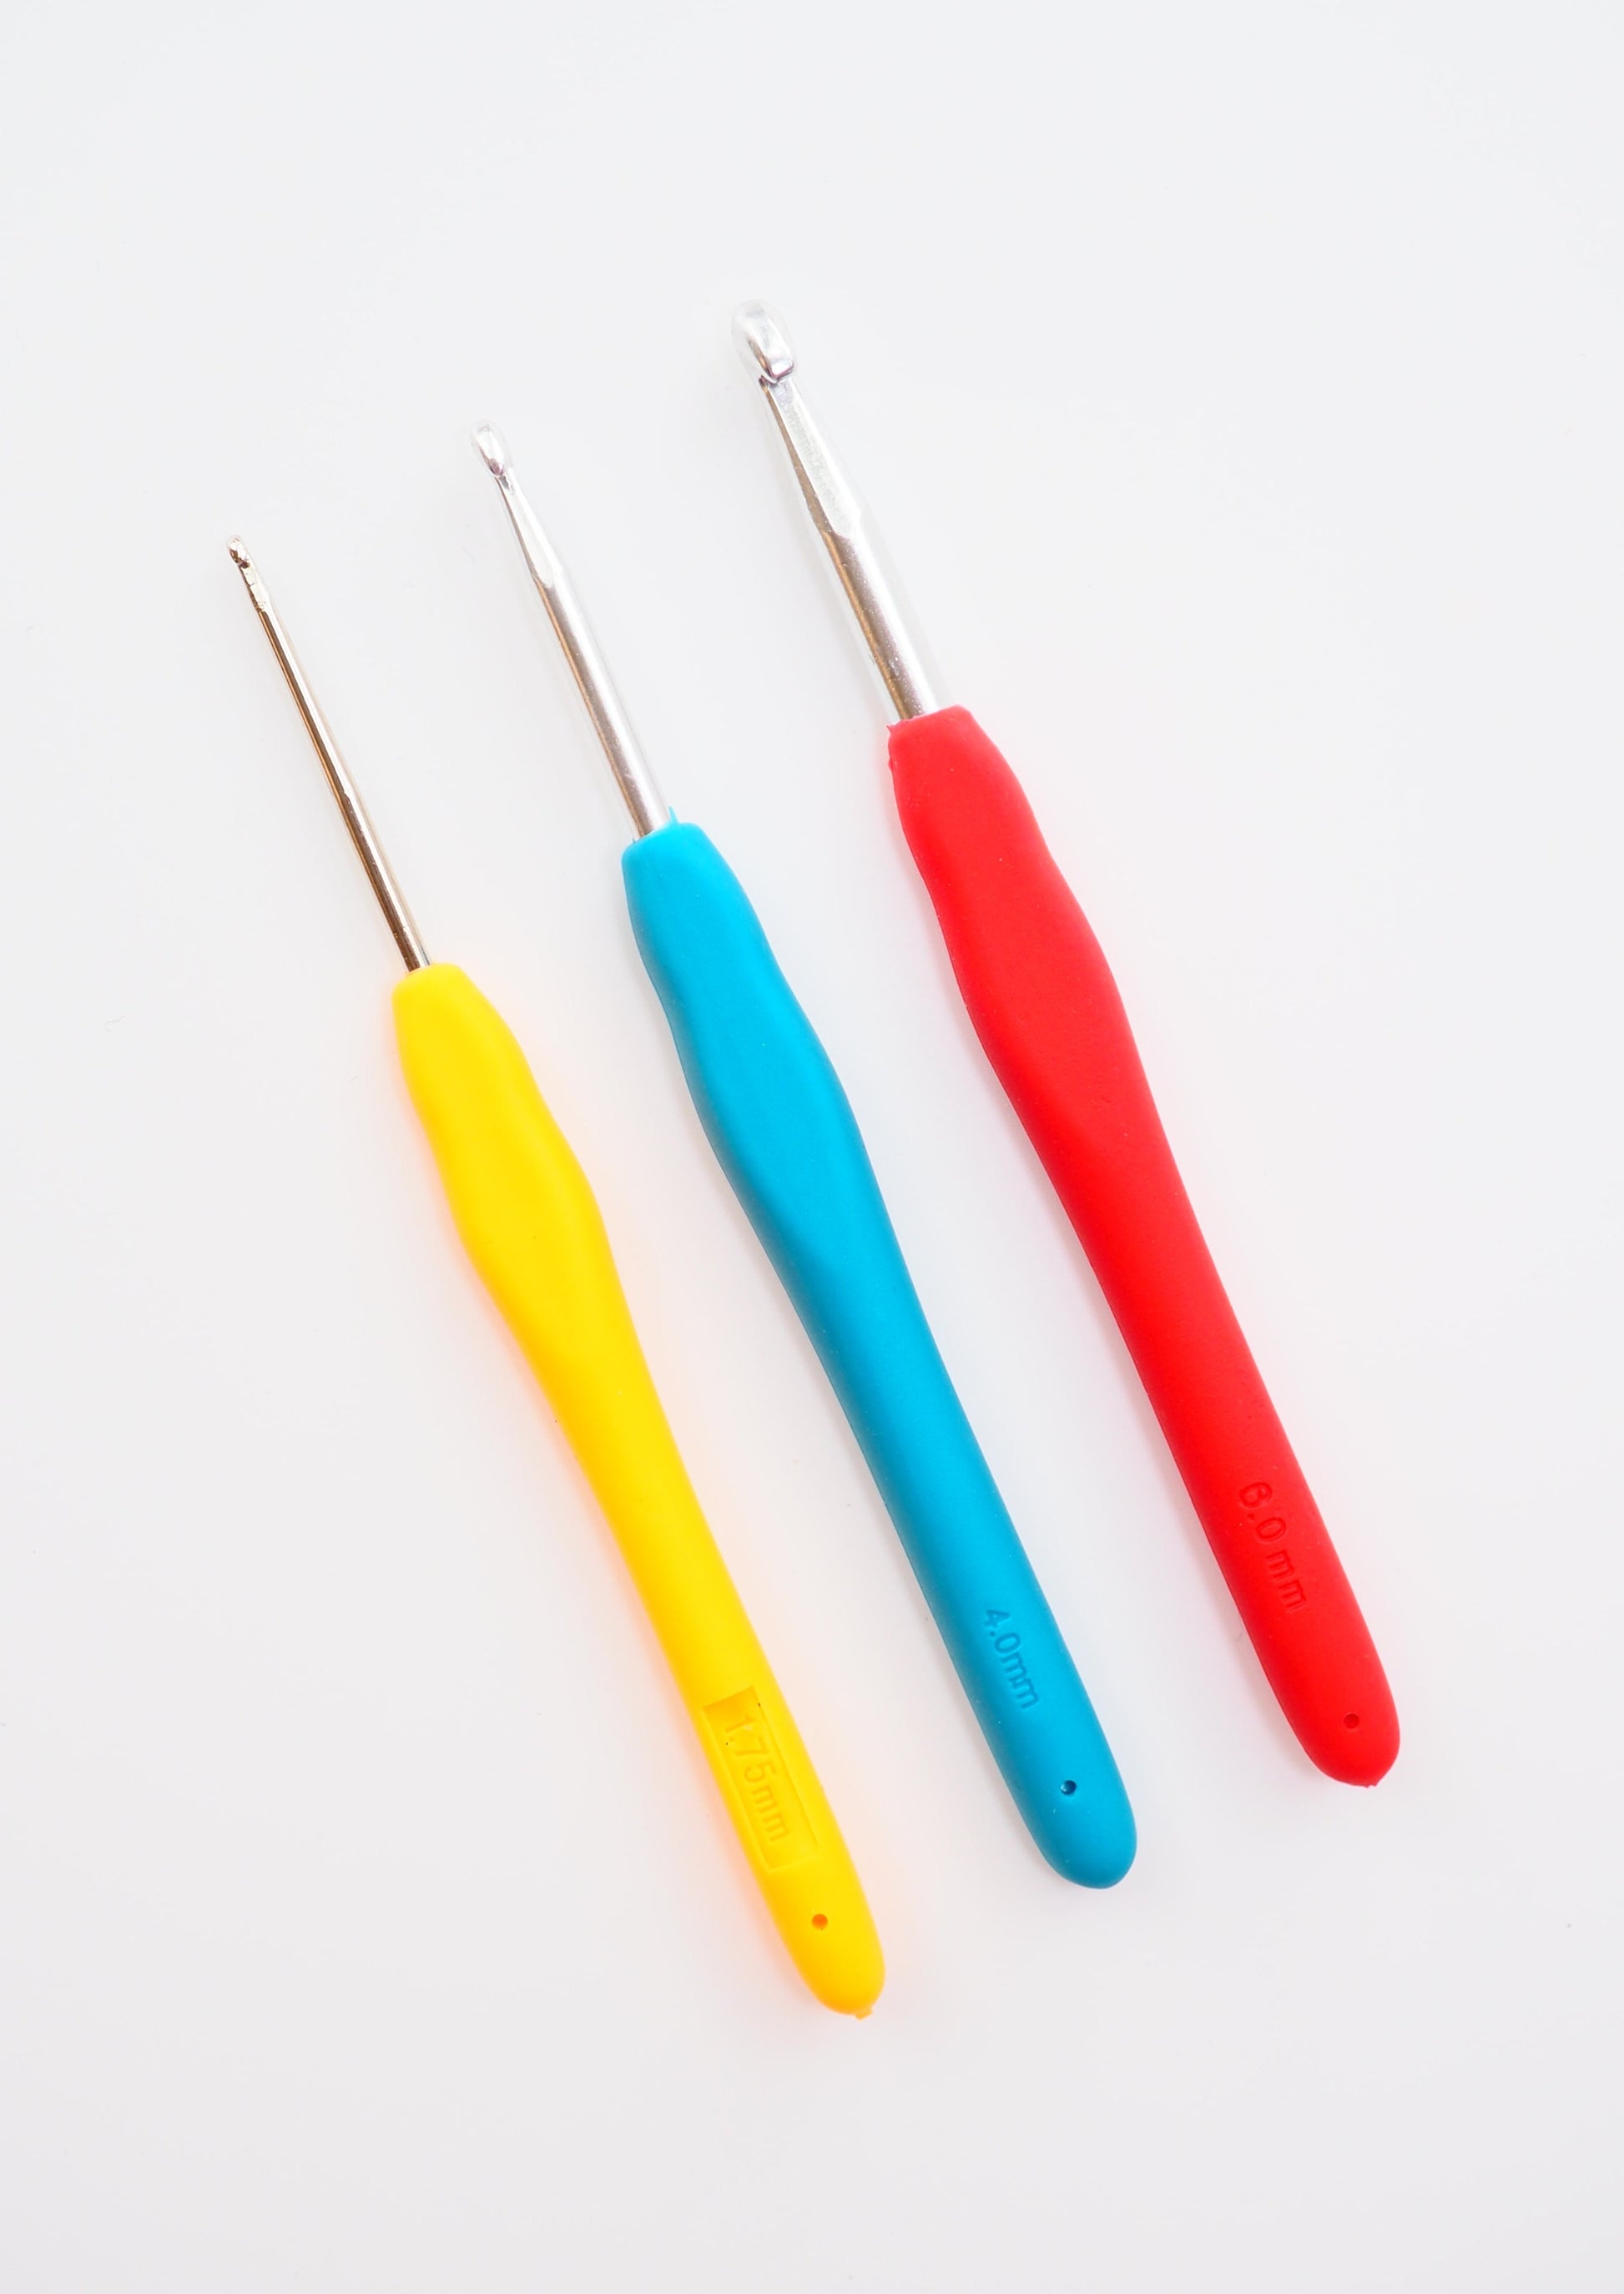 image of three cushioned crochet hooks in sized 1.75mm, 4mm and 5mm